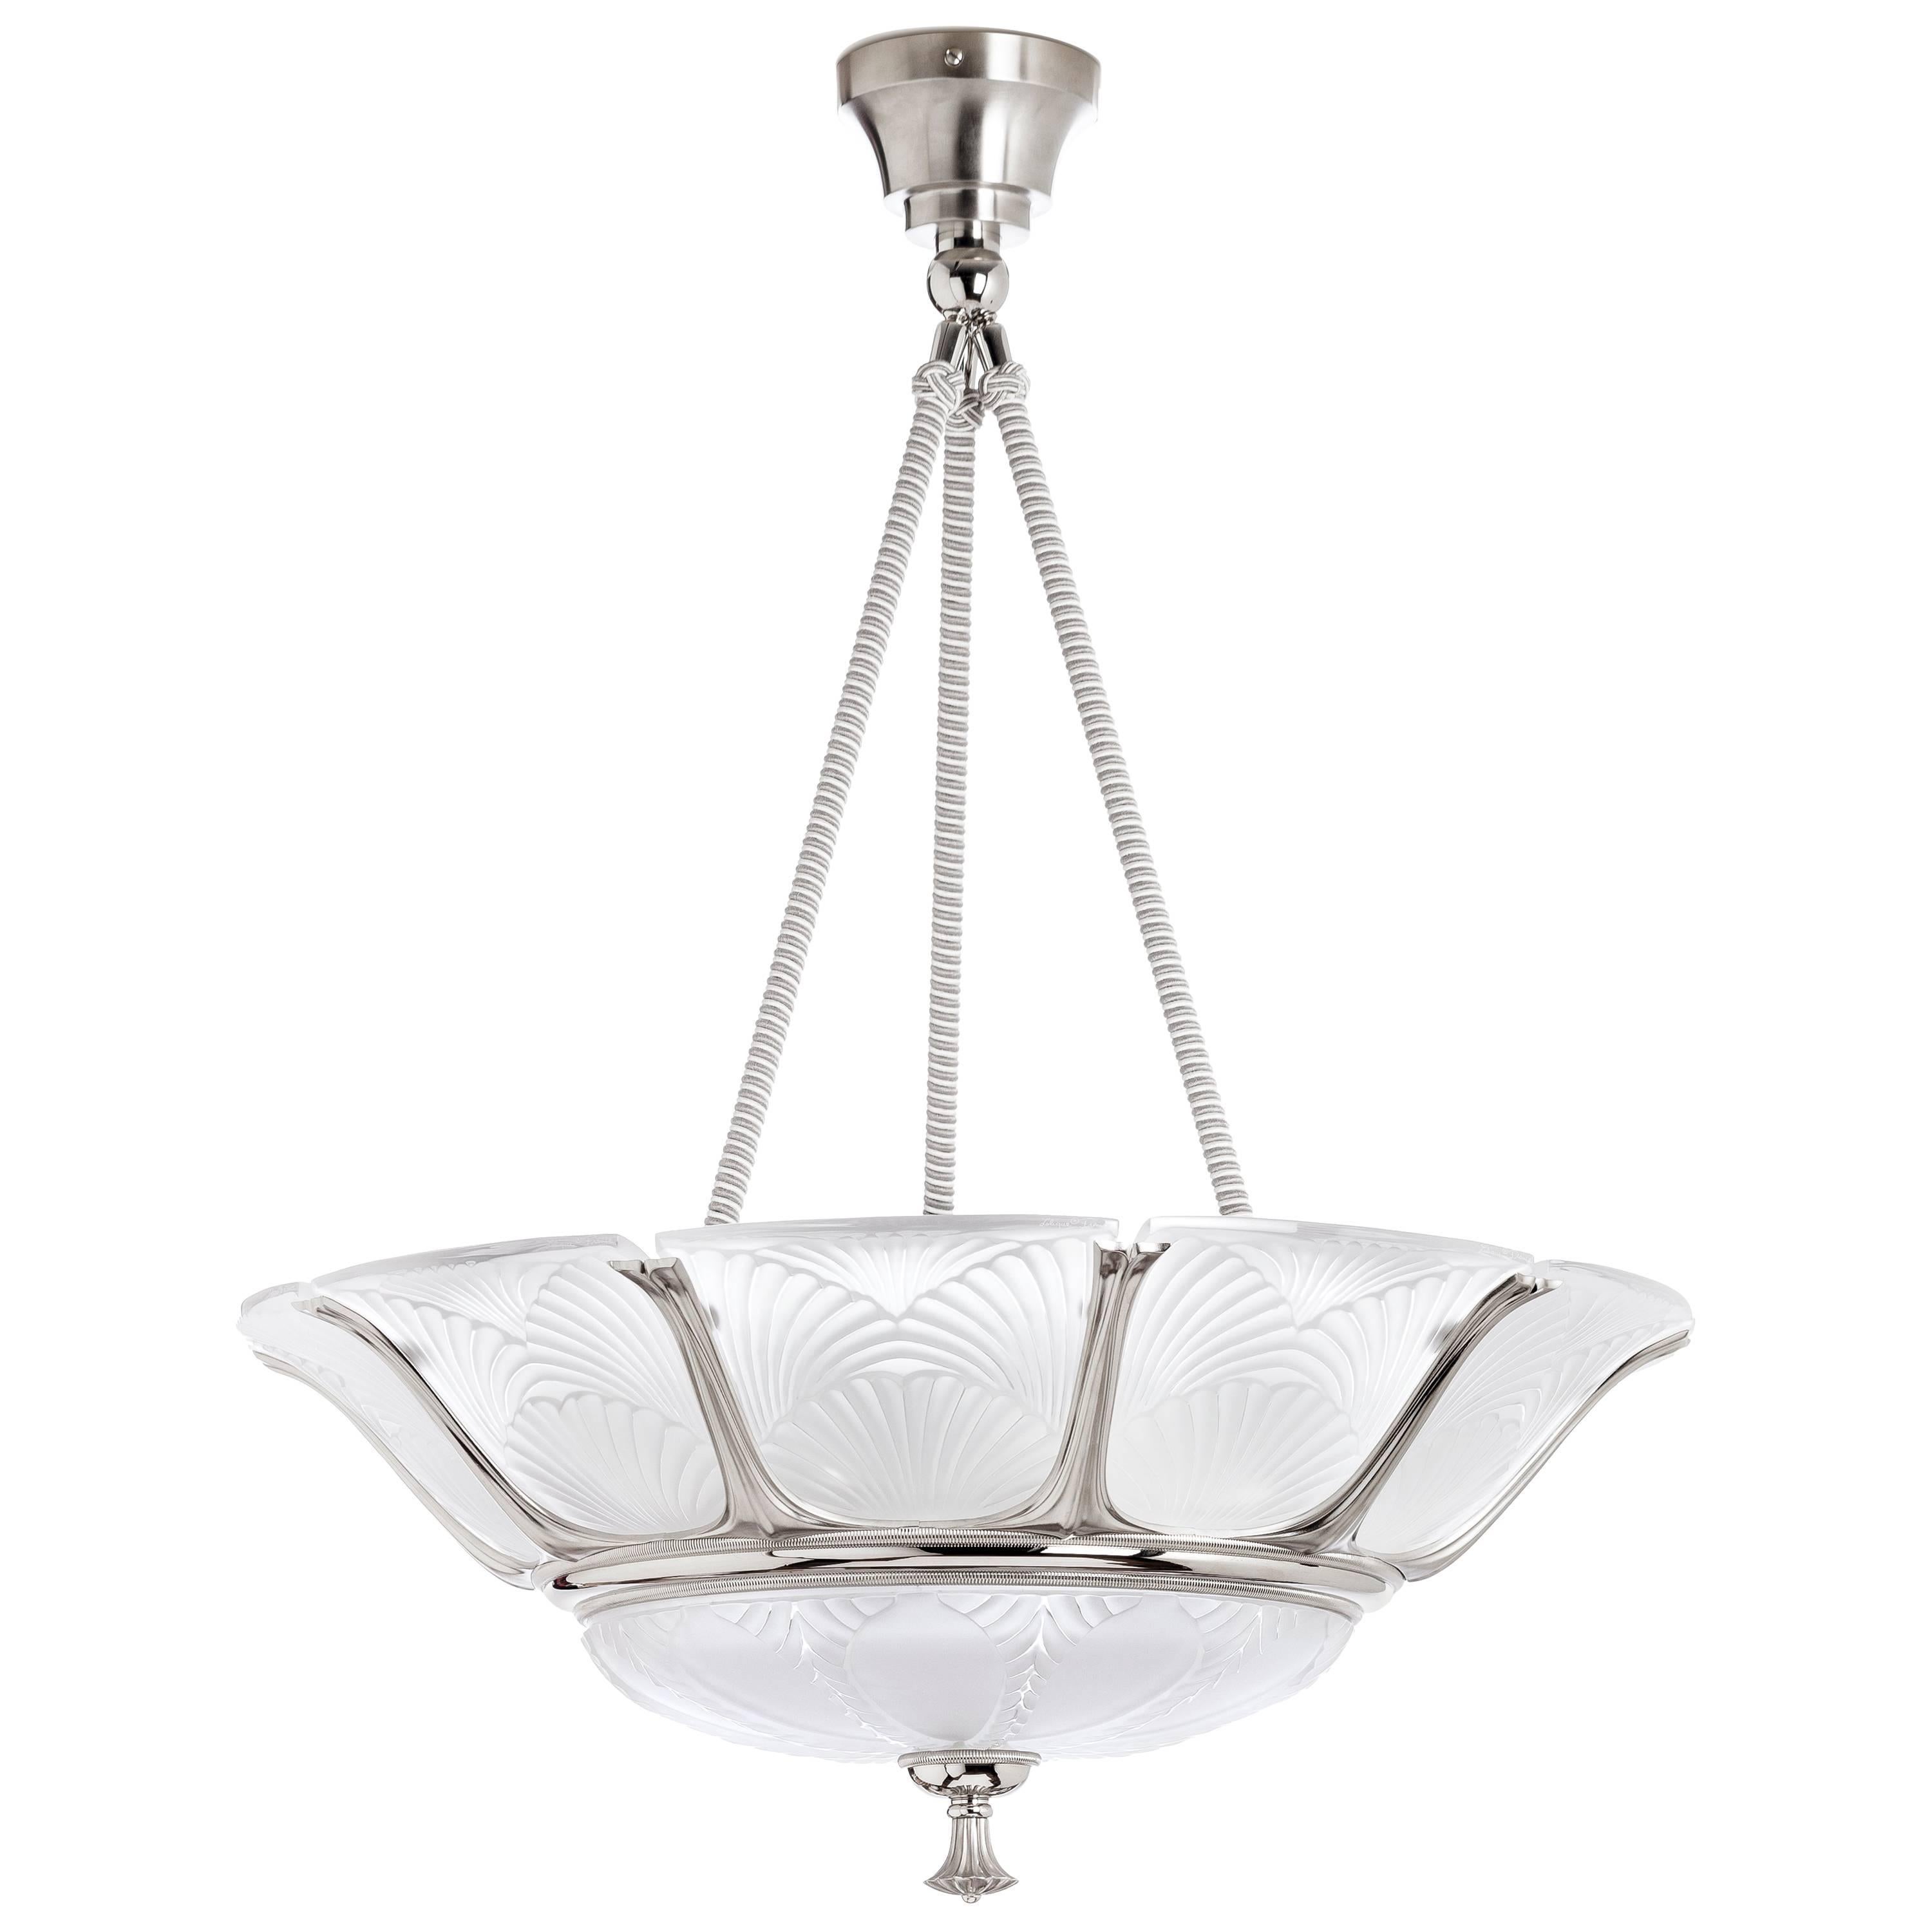 Lalique Ginkgo Crystal and Brushed Nickel Ceiling Lamp